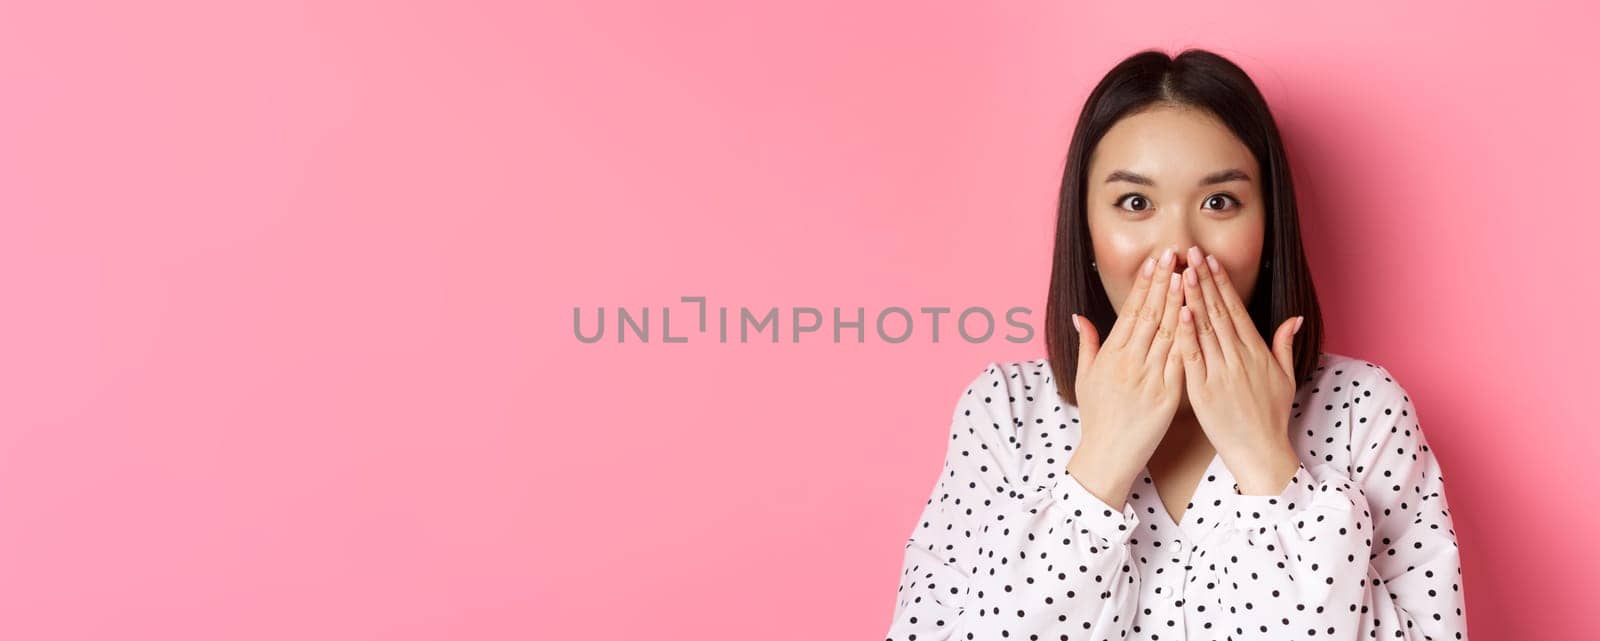 Close-up of beautiful asian girl looking surprised and excited, cover mouth and staring amazed at camera, standing over pink background.